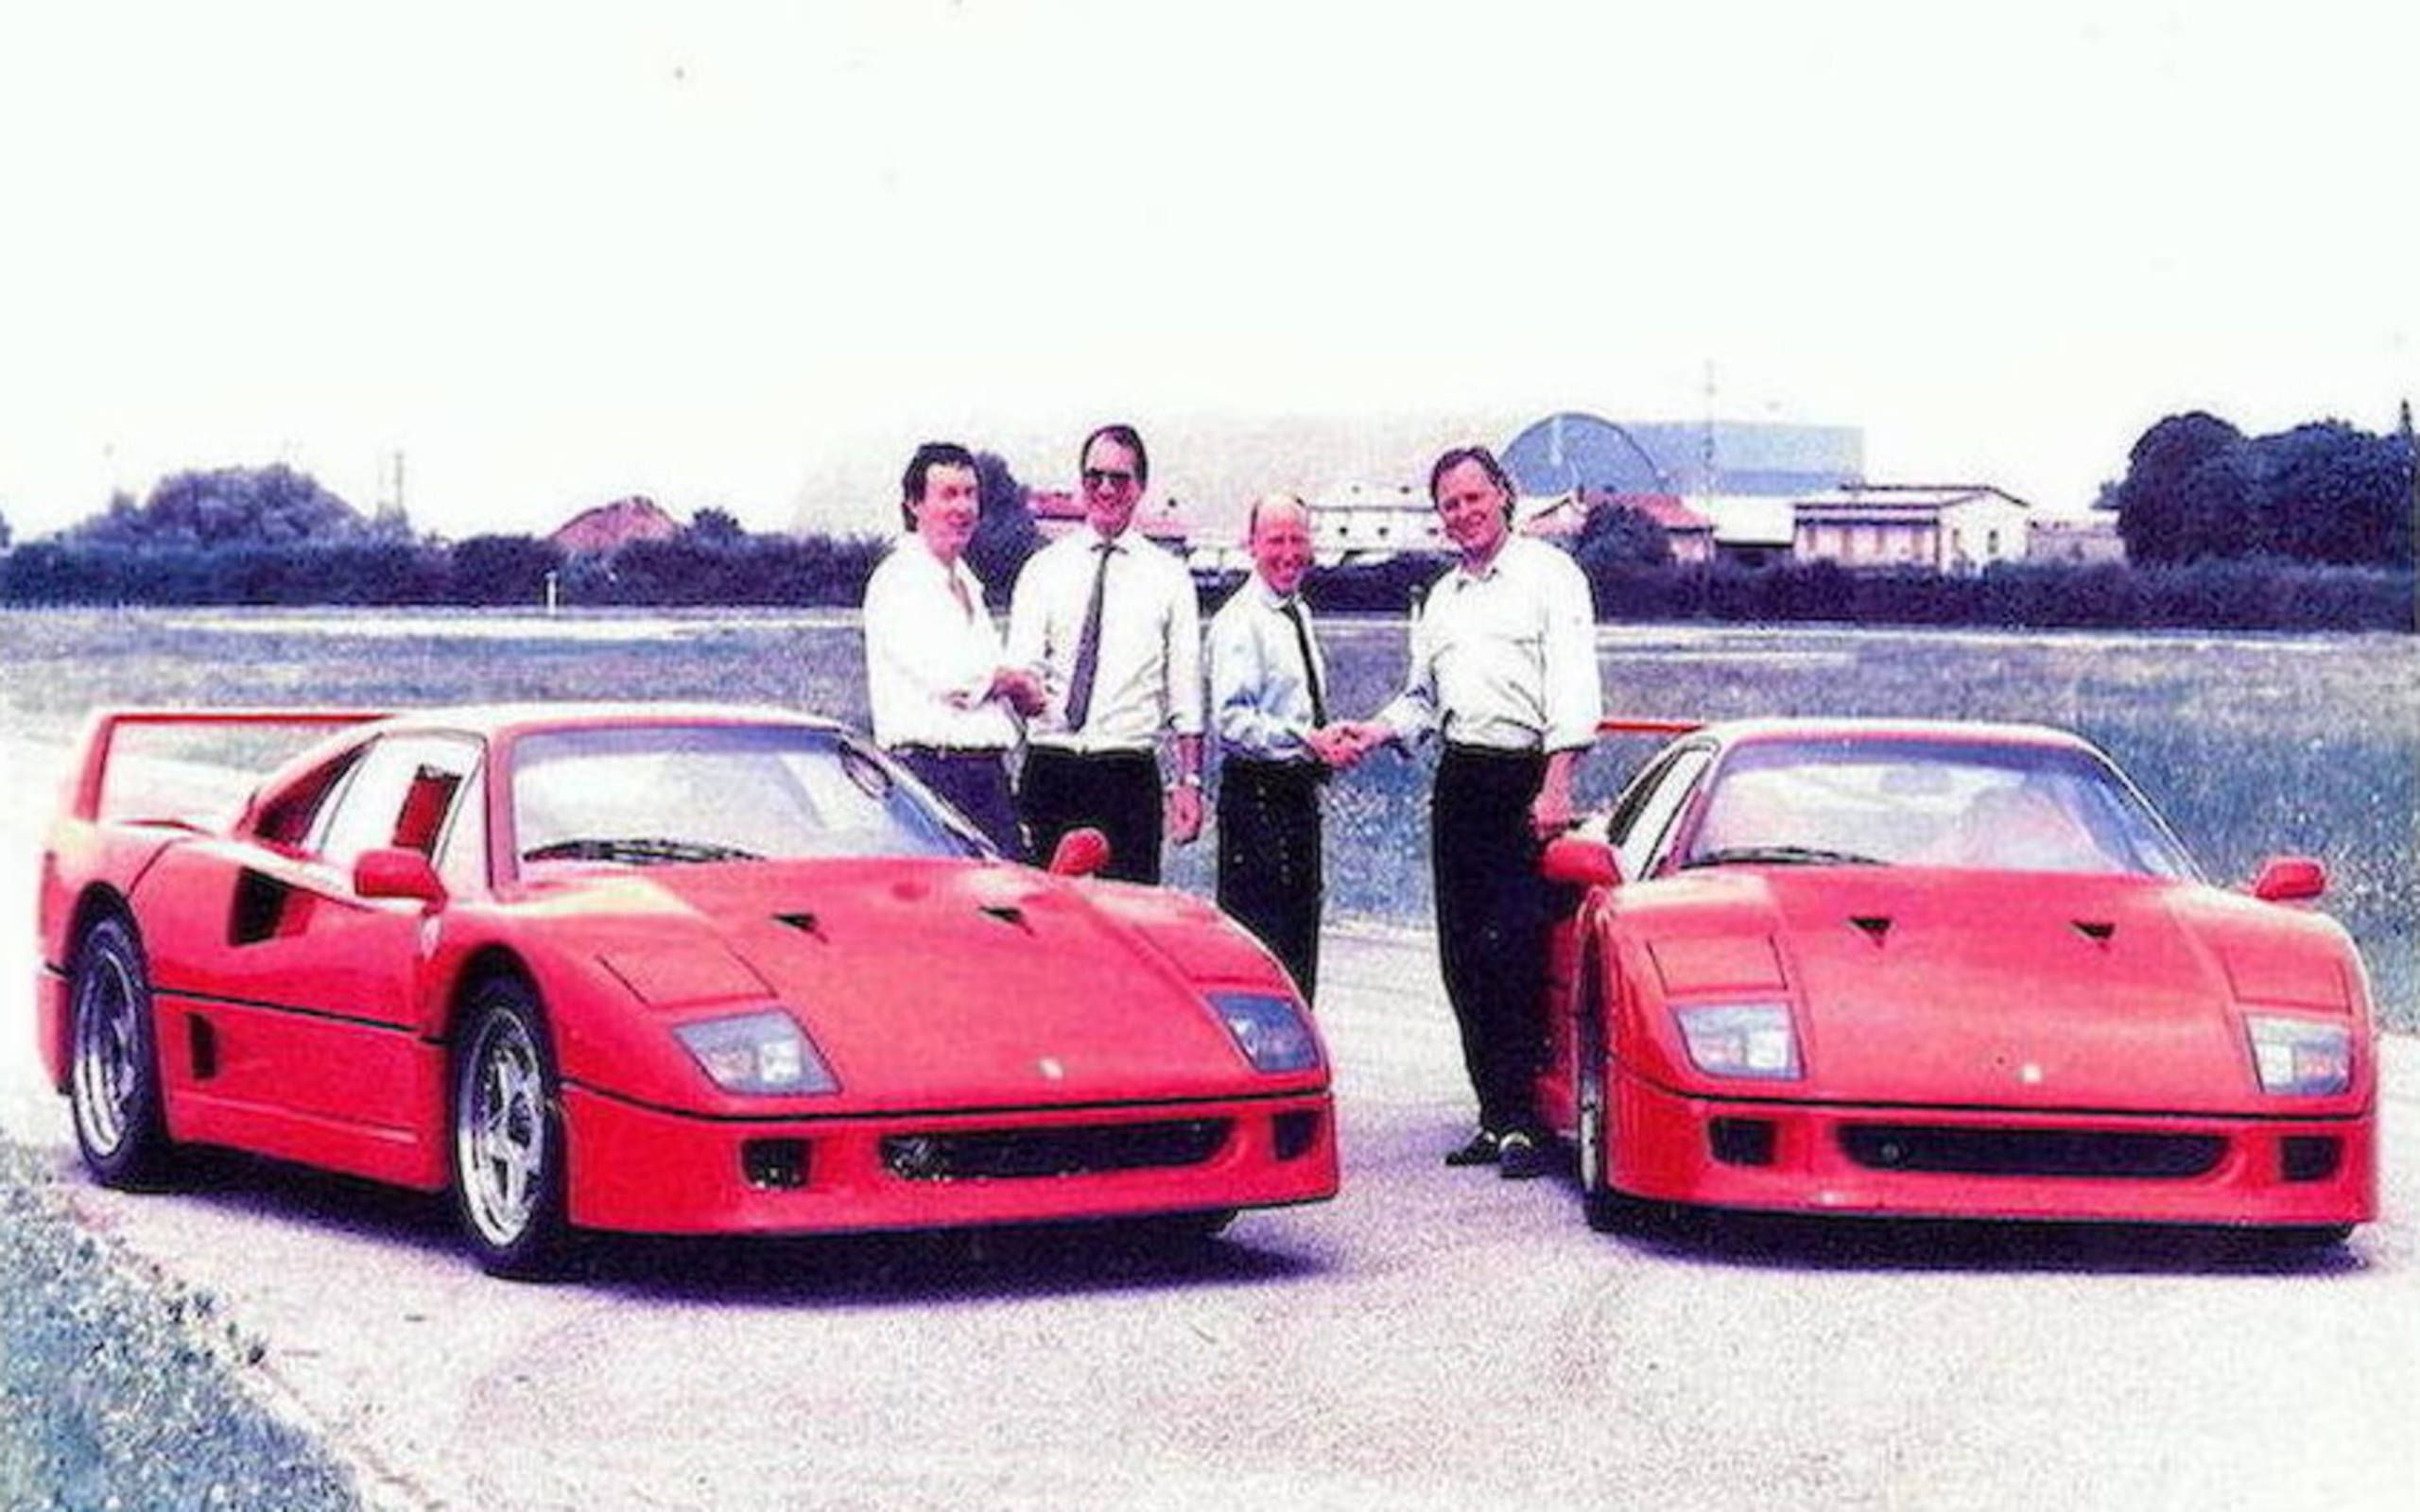 A Ferrari with Pink Floyd provenance: David Gilmour's F40 up for